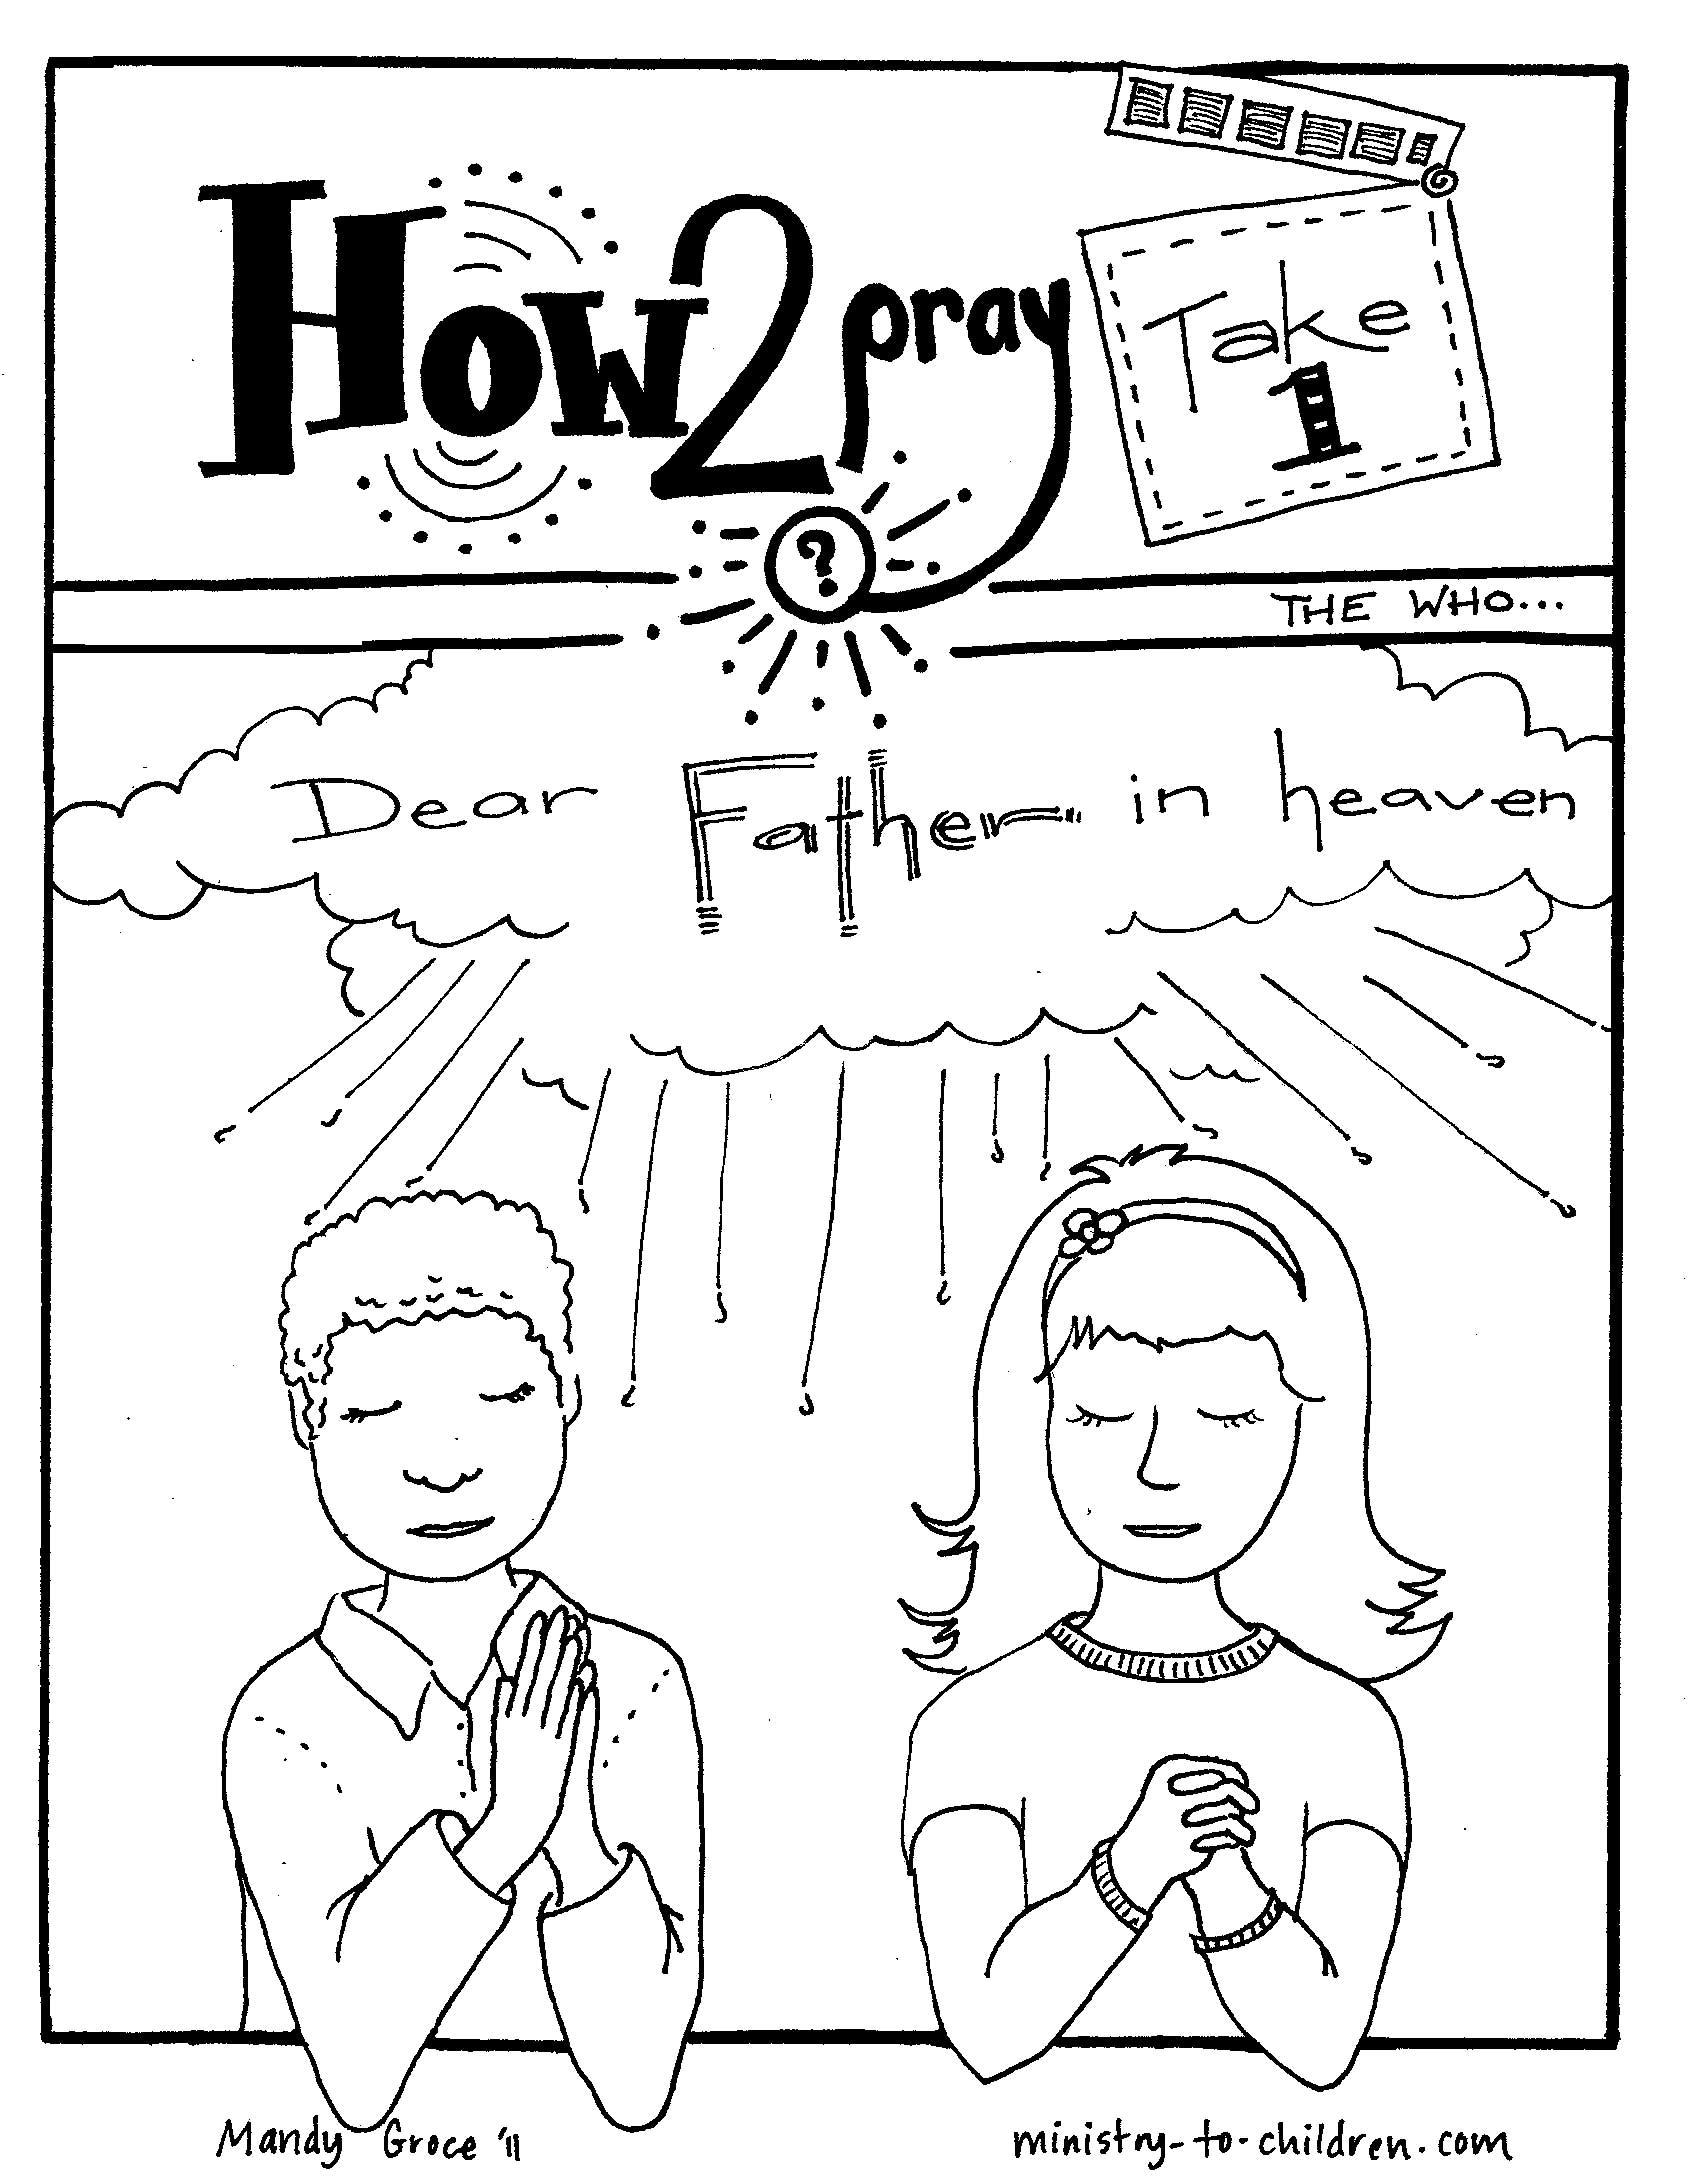 The Lord's Prayer Coloring Book for Kids (FREE) 5 Pages (download